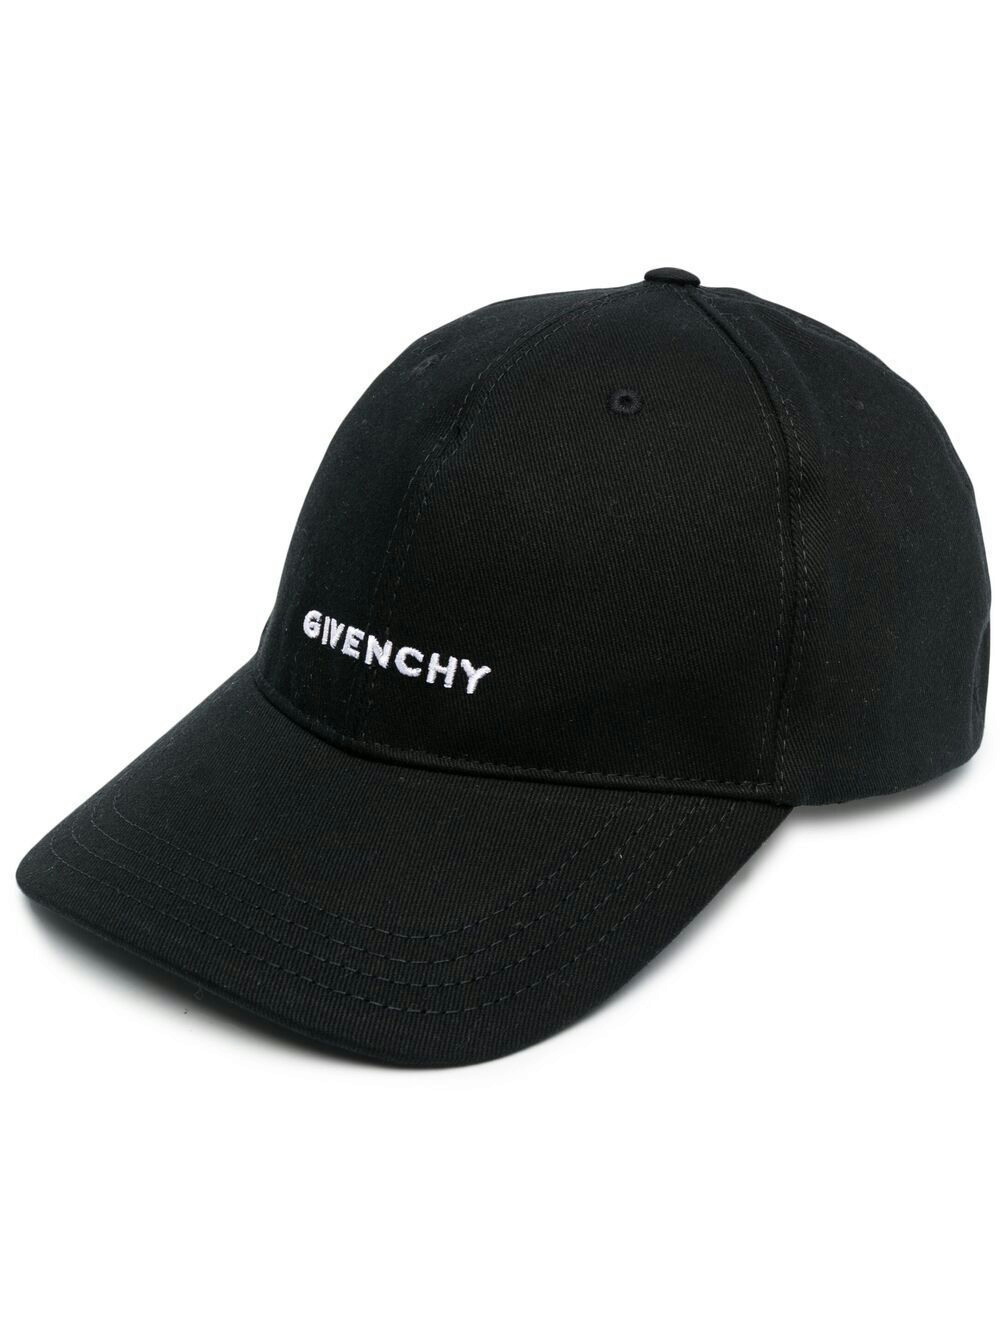 Givenchy - Embroidered logo cap